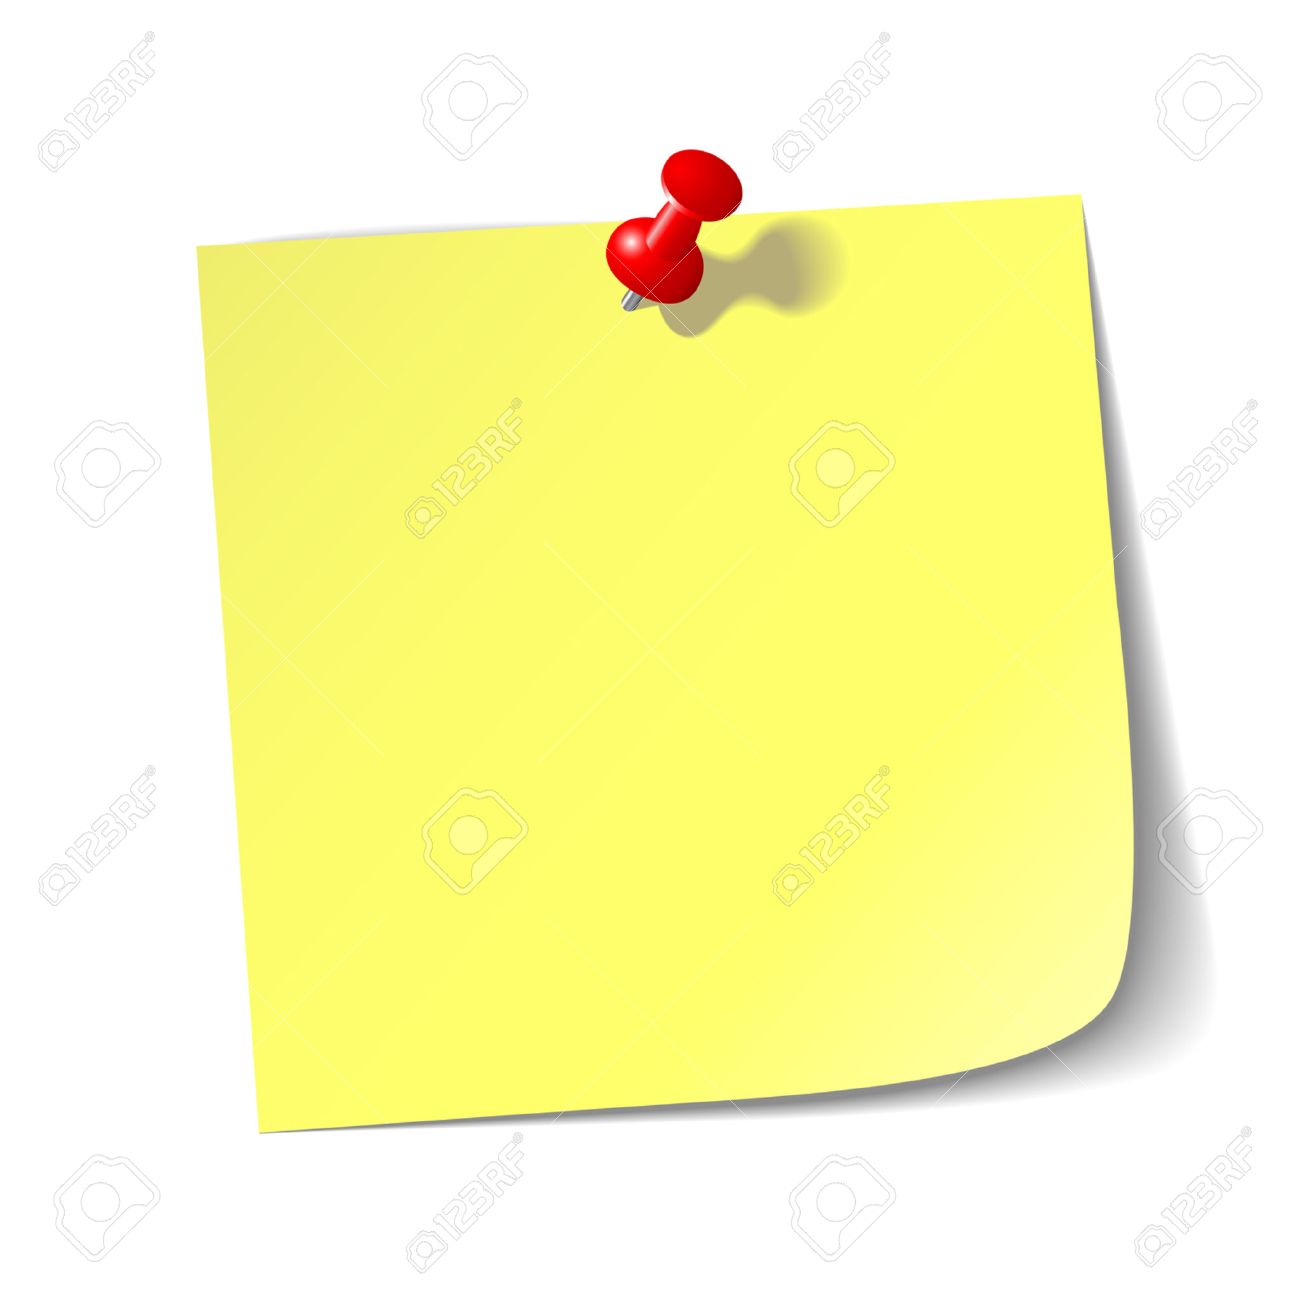 Post It, Note, Letter, Sticky Note, Remind, Message, Communication 